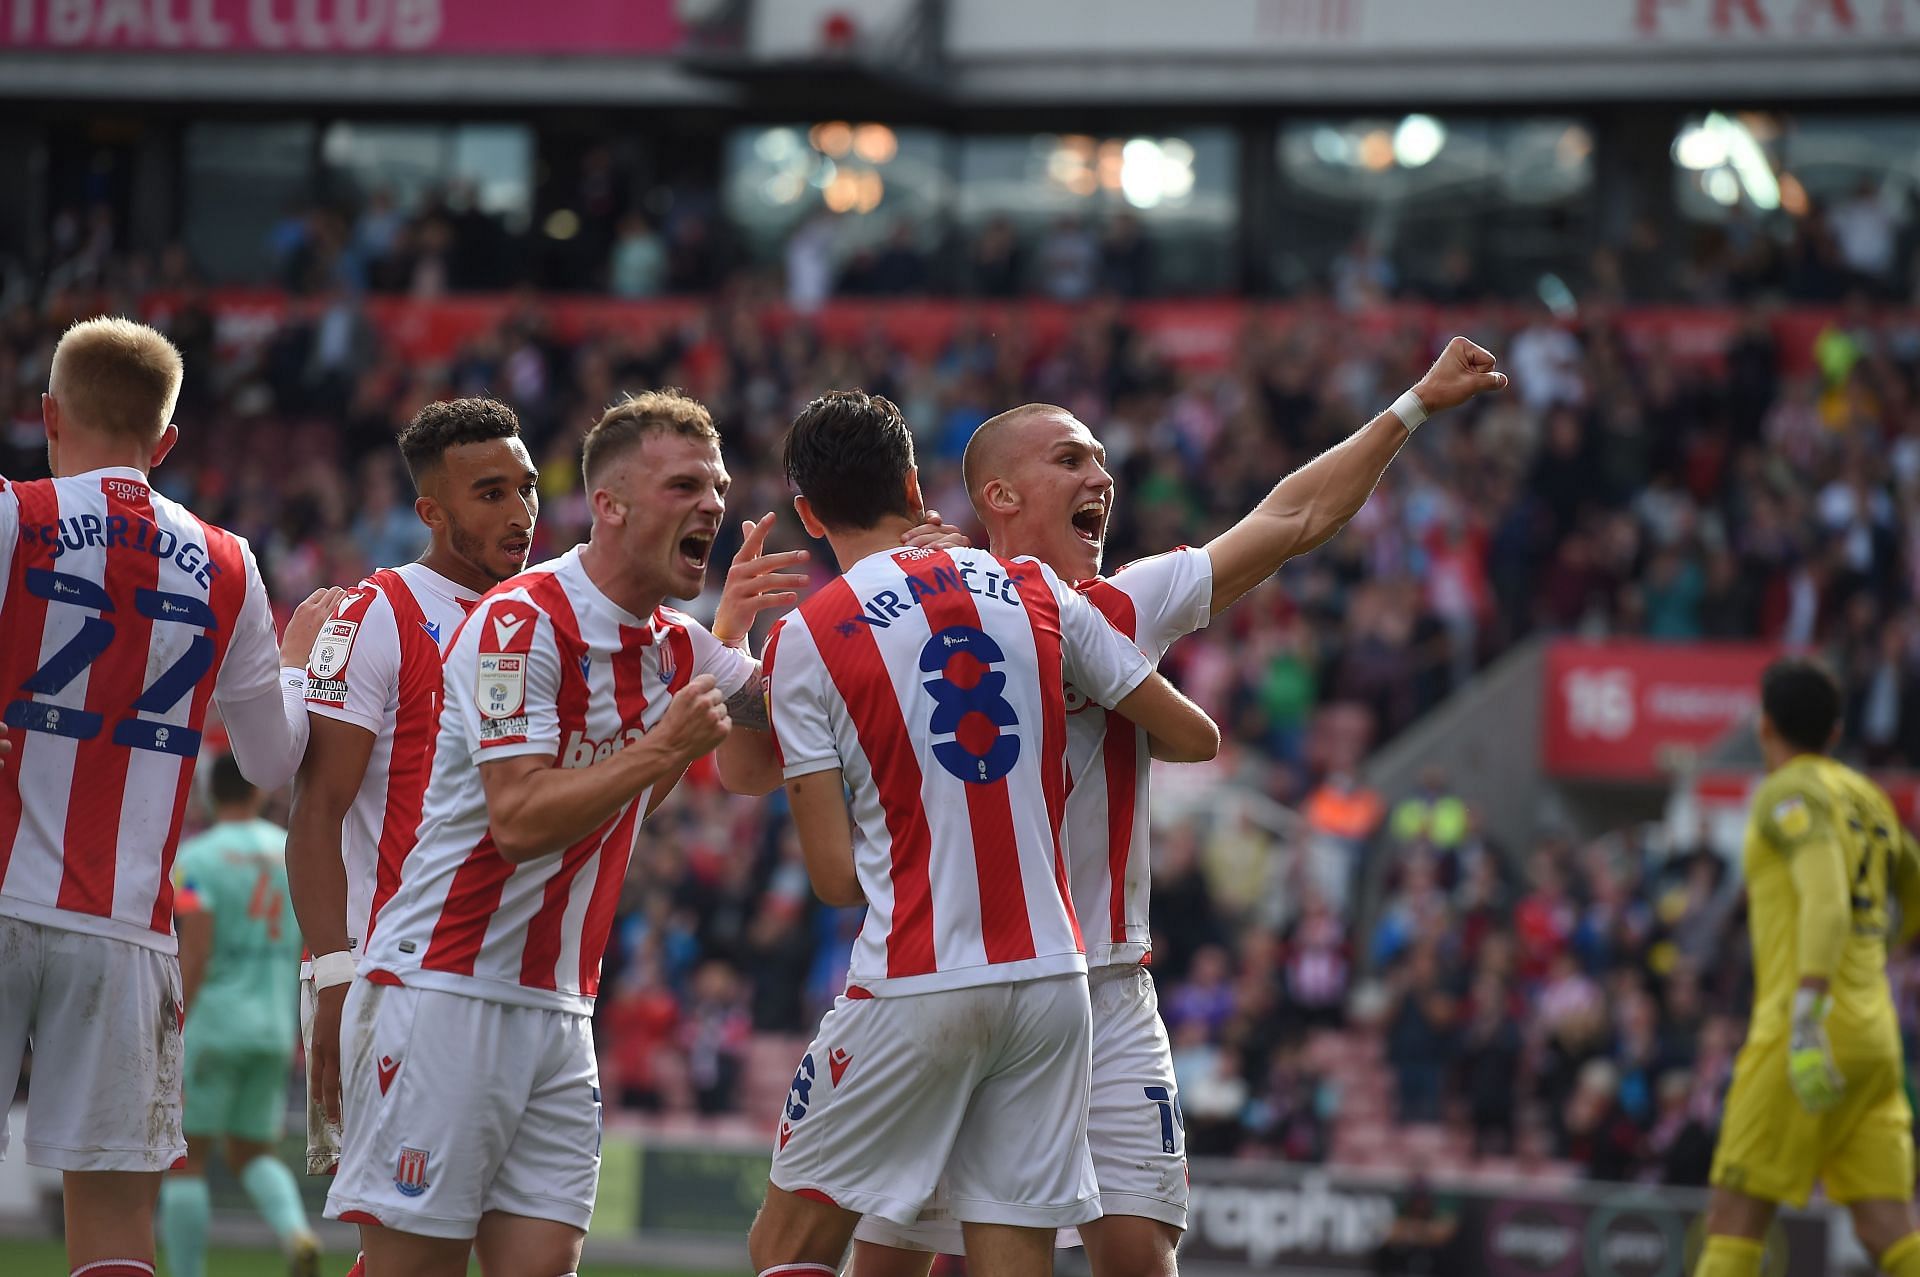 Stoke City will face Peterborough United on Saturday